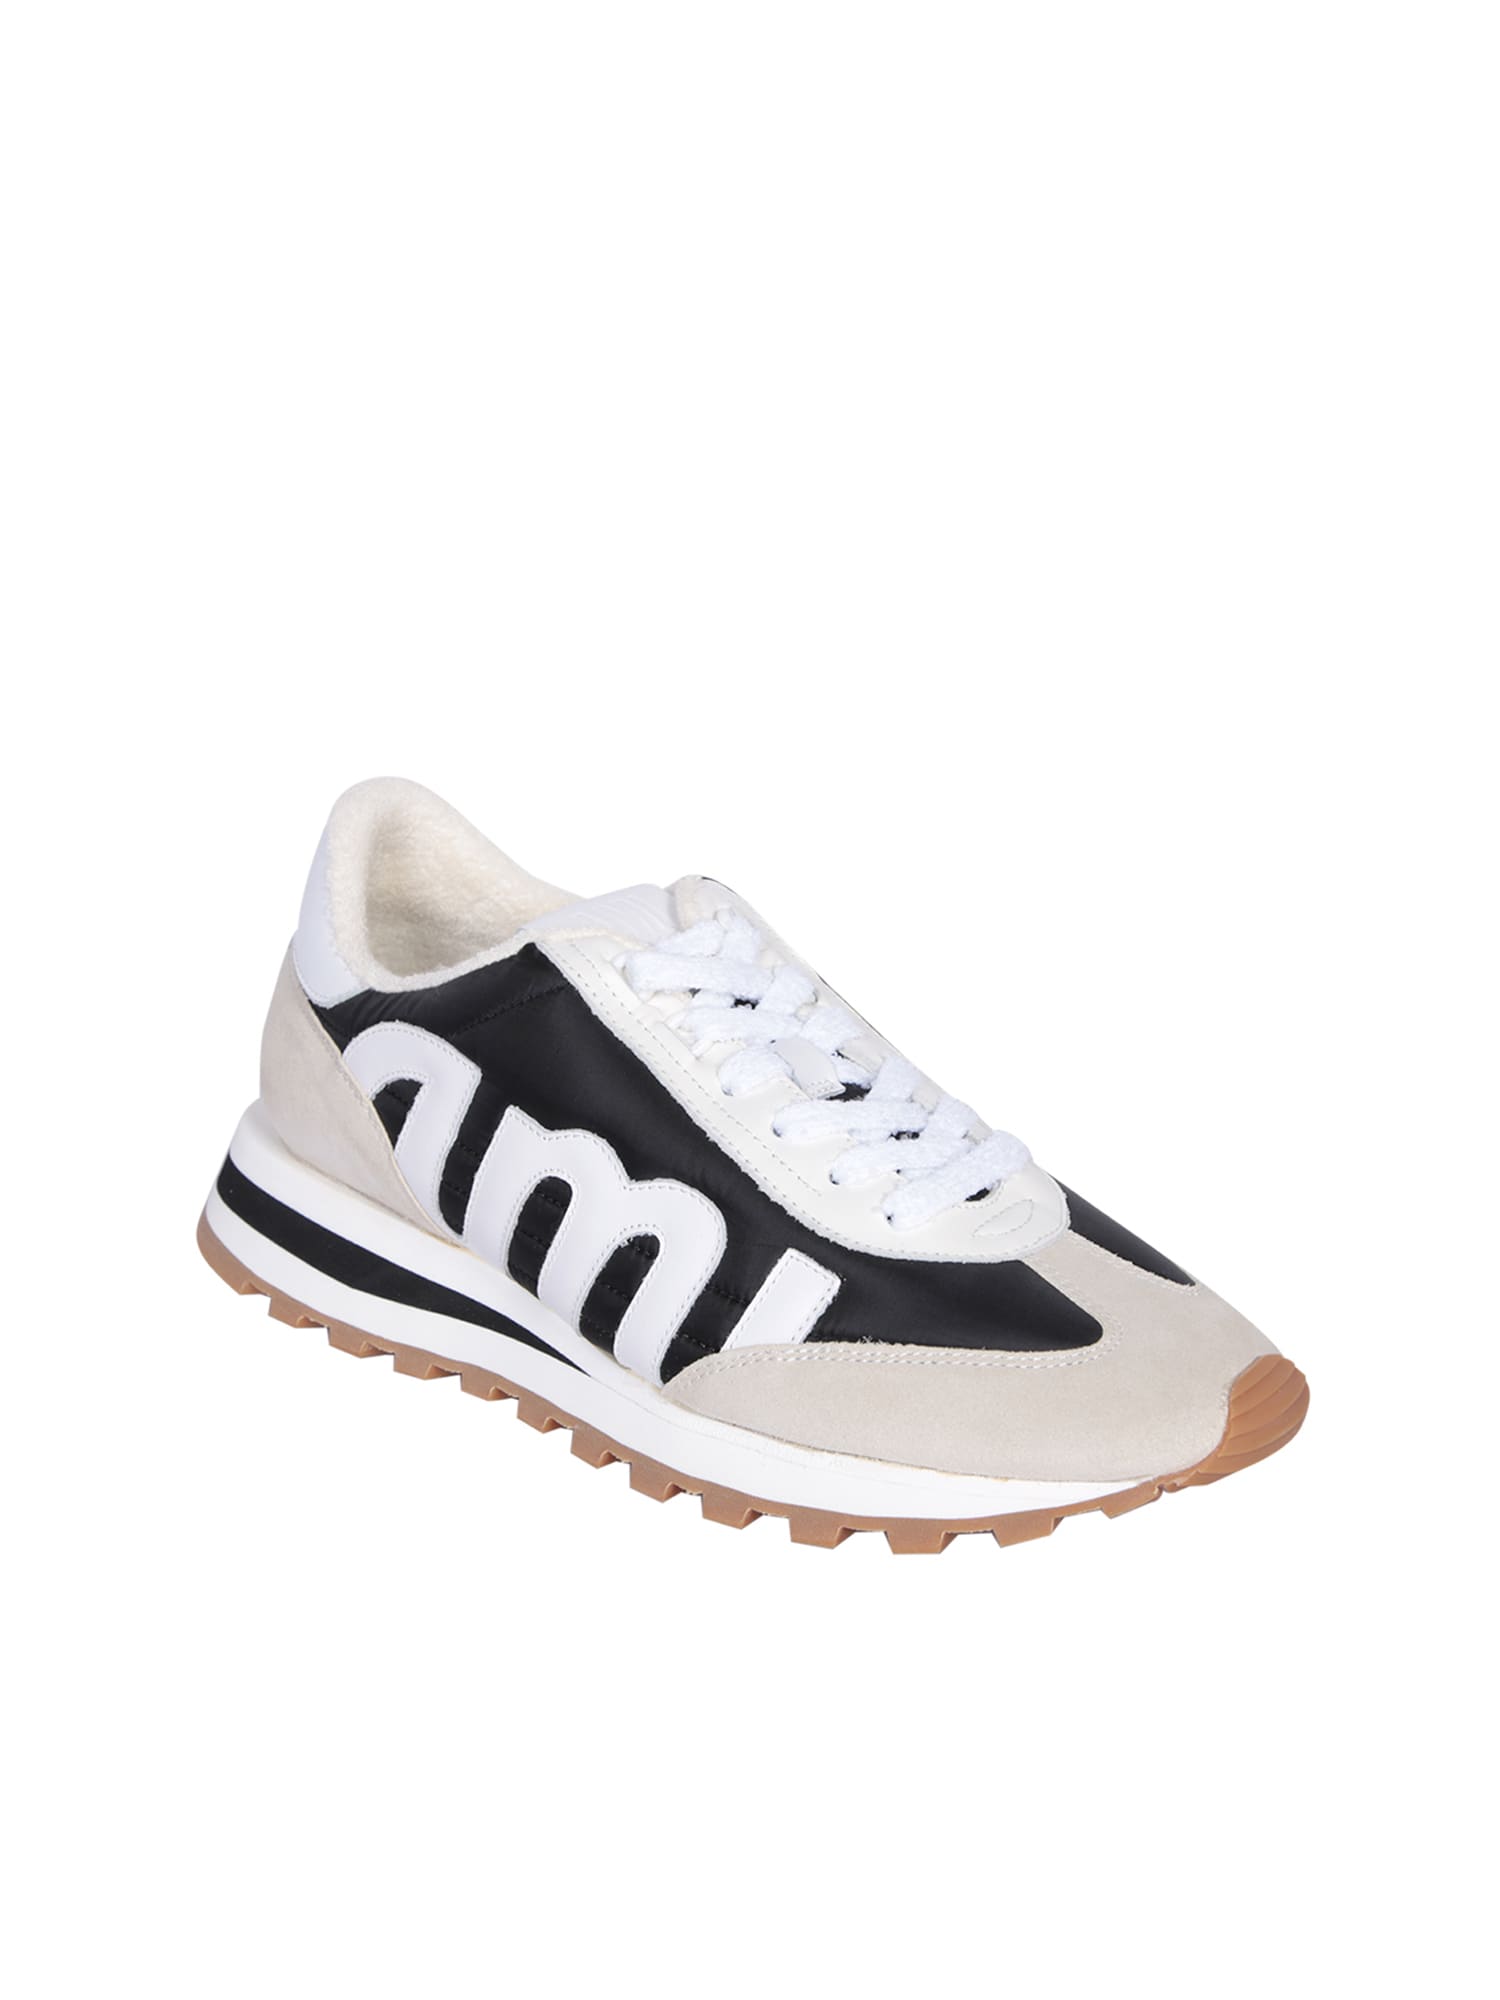 Shop Ami Alexandre Mattiussi Ami Rush Leather And Canvas Sneakers In Black And Ivory